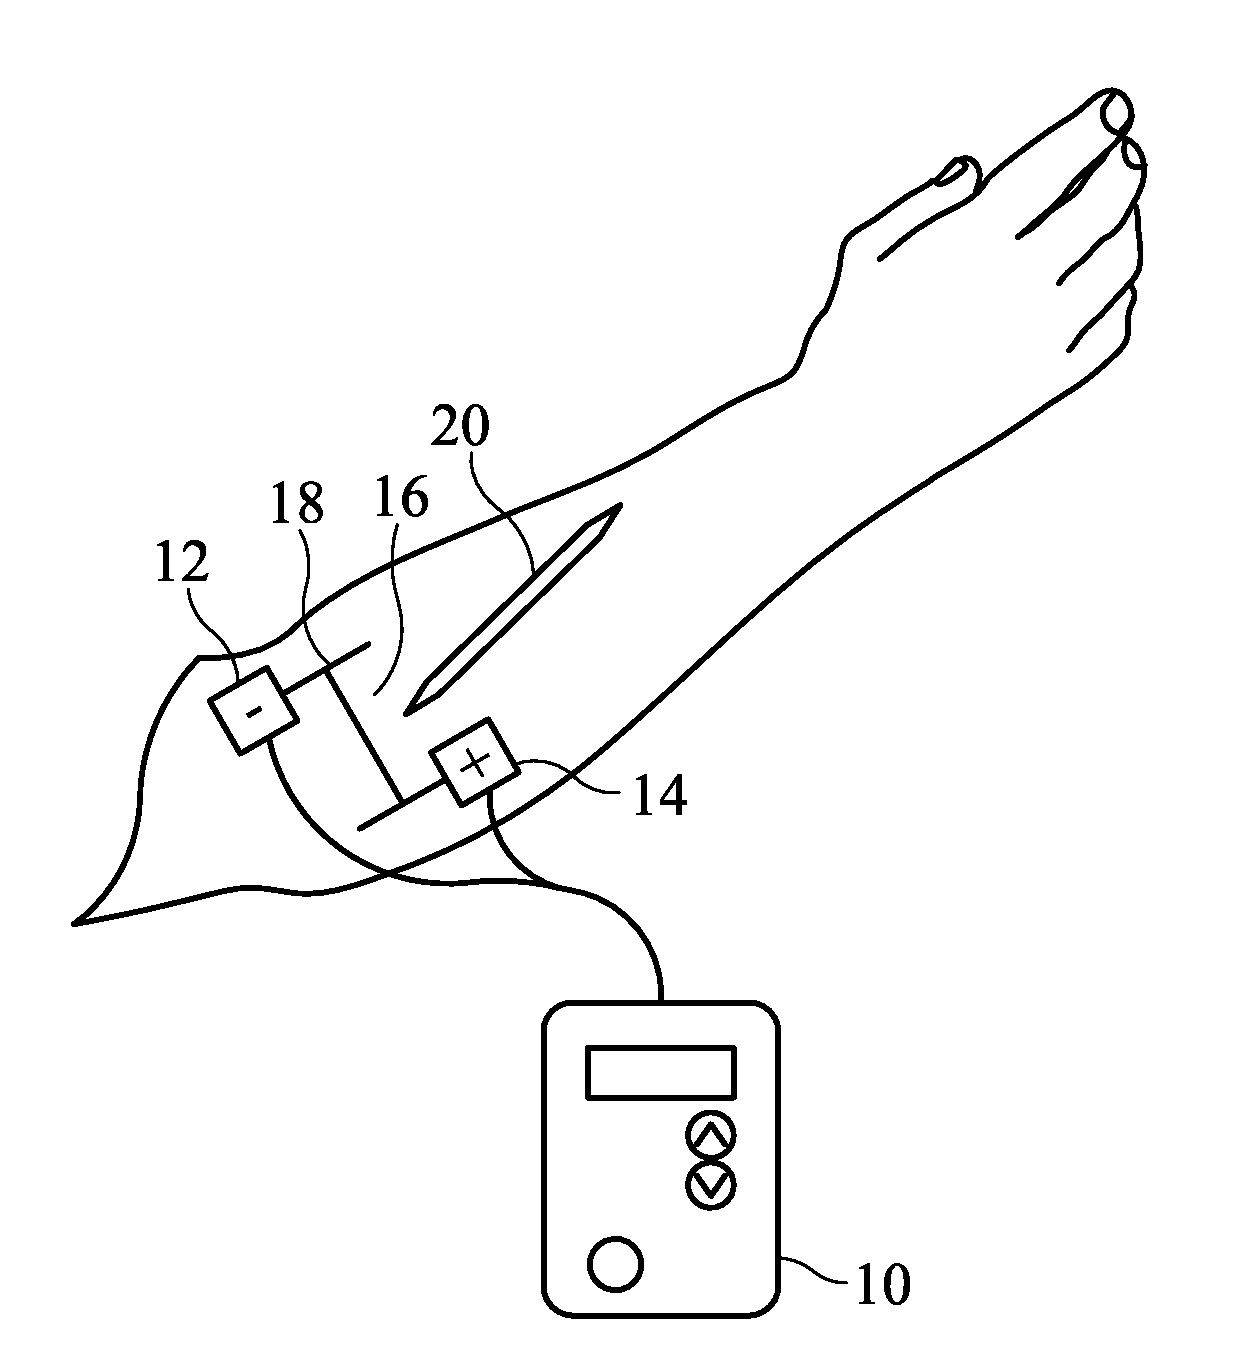 System and Method for Pain-Free Injections